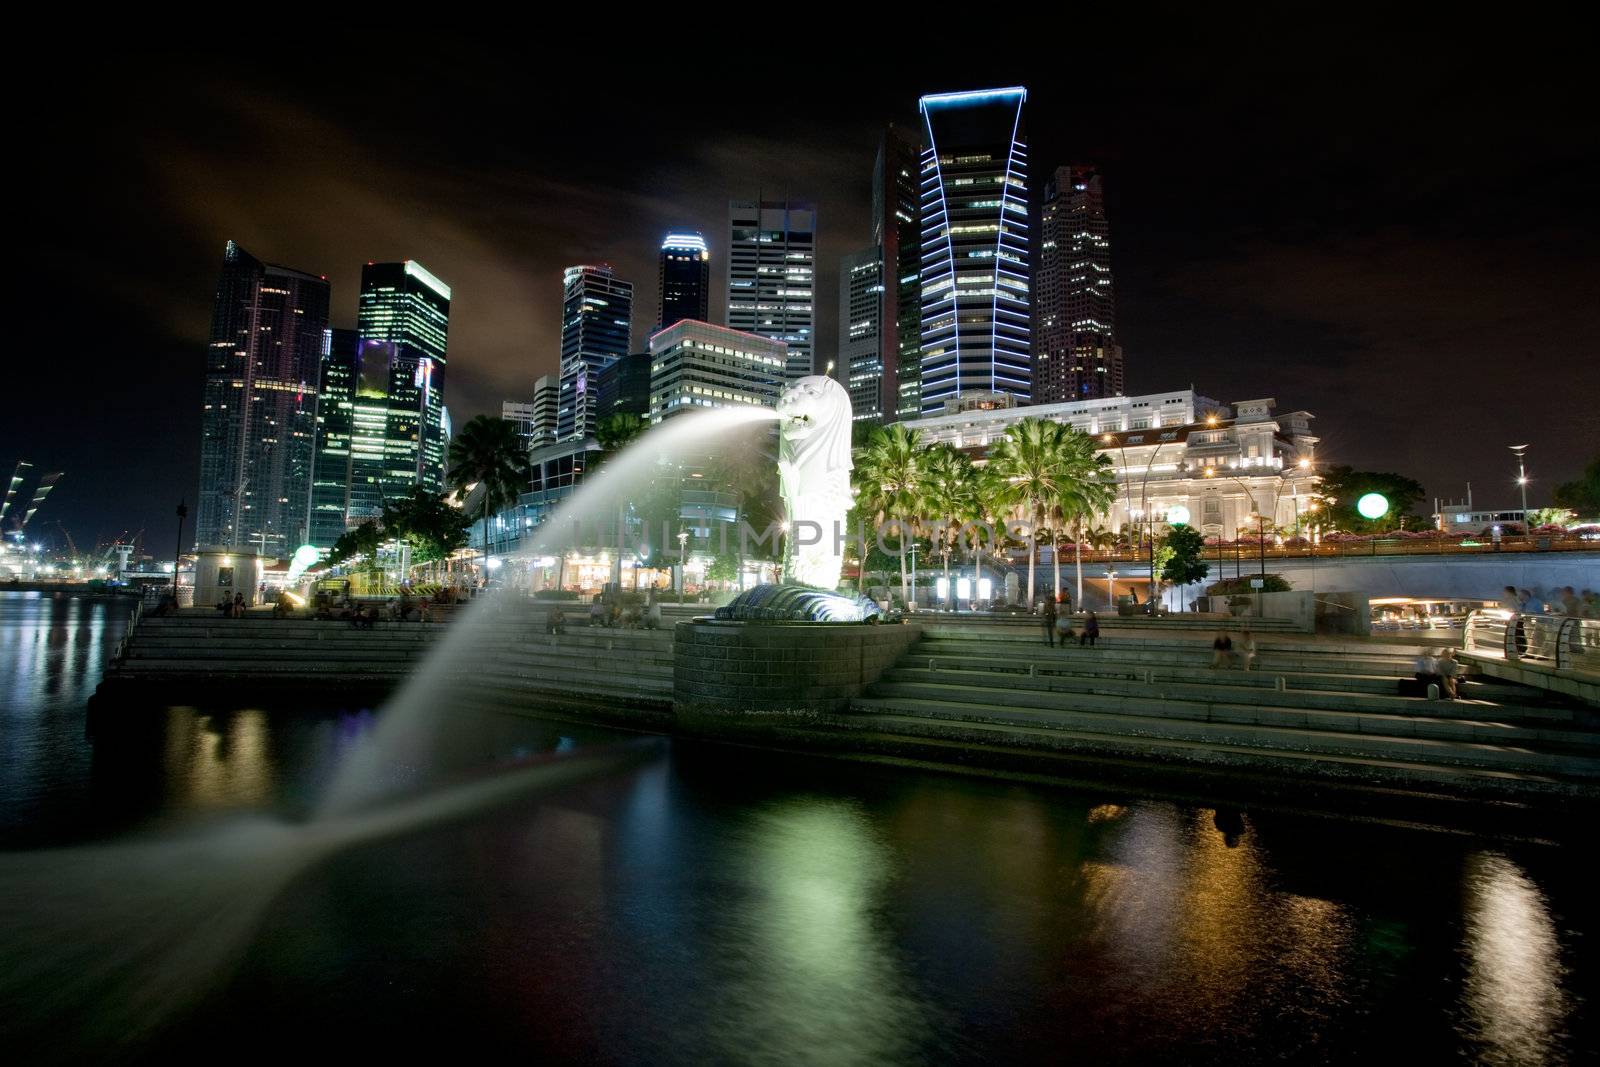 A view of singapore at night with the merlion in the foreground